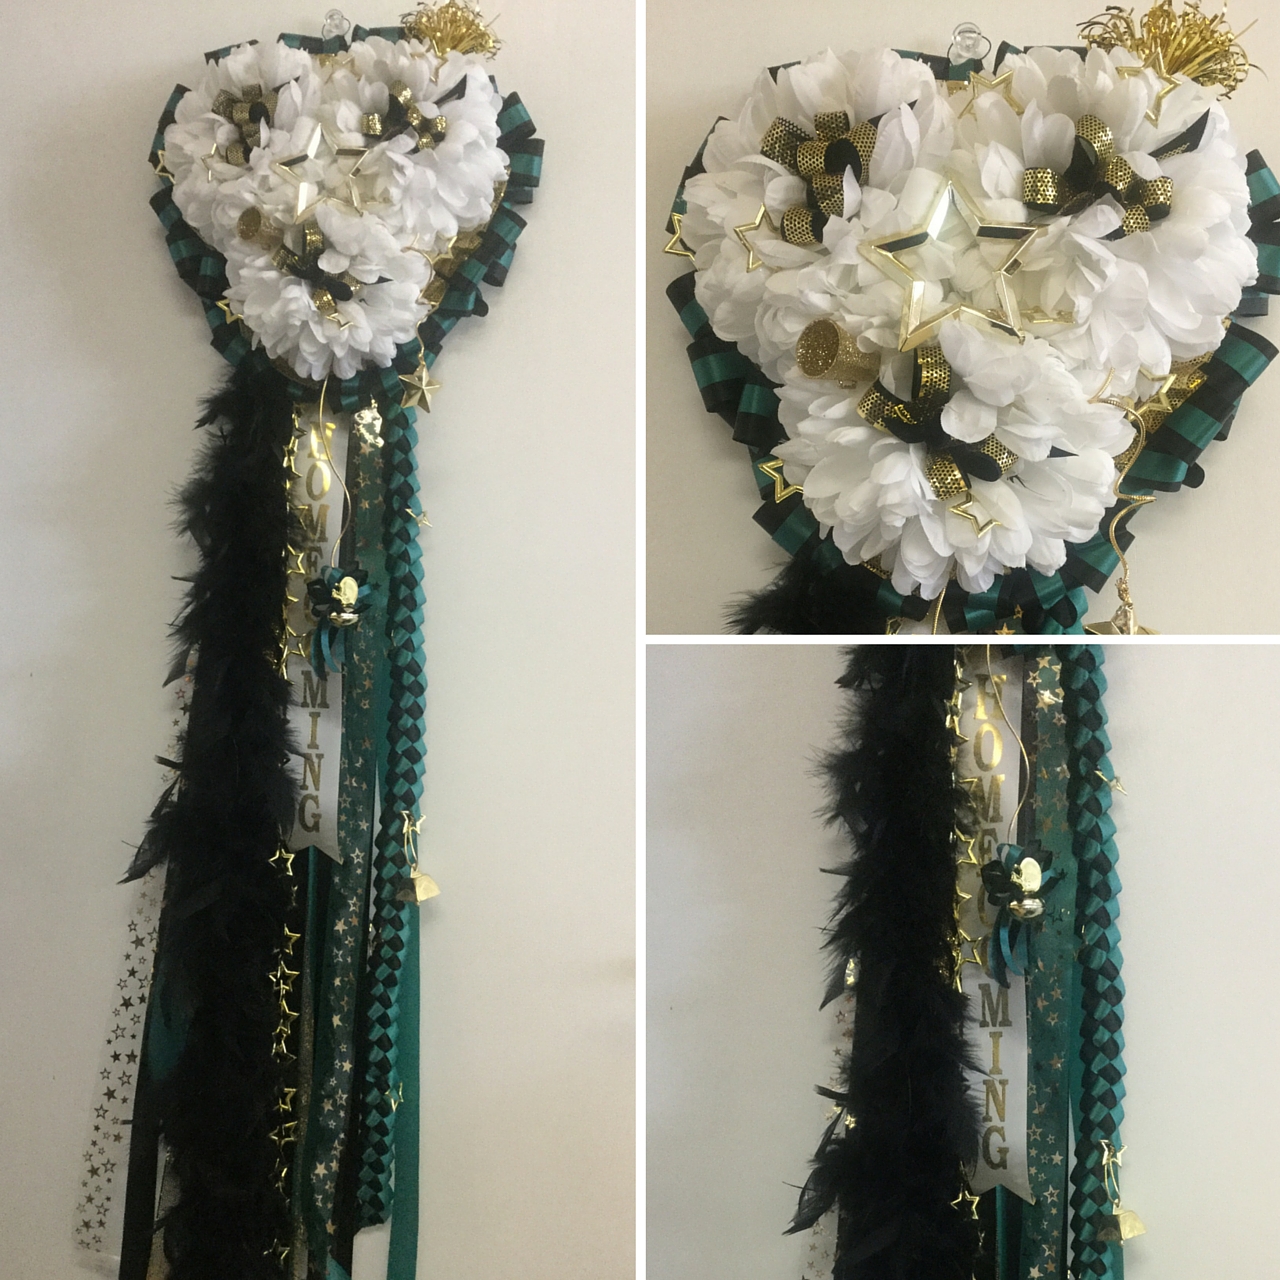 homecoming mums in houston tx 3